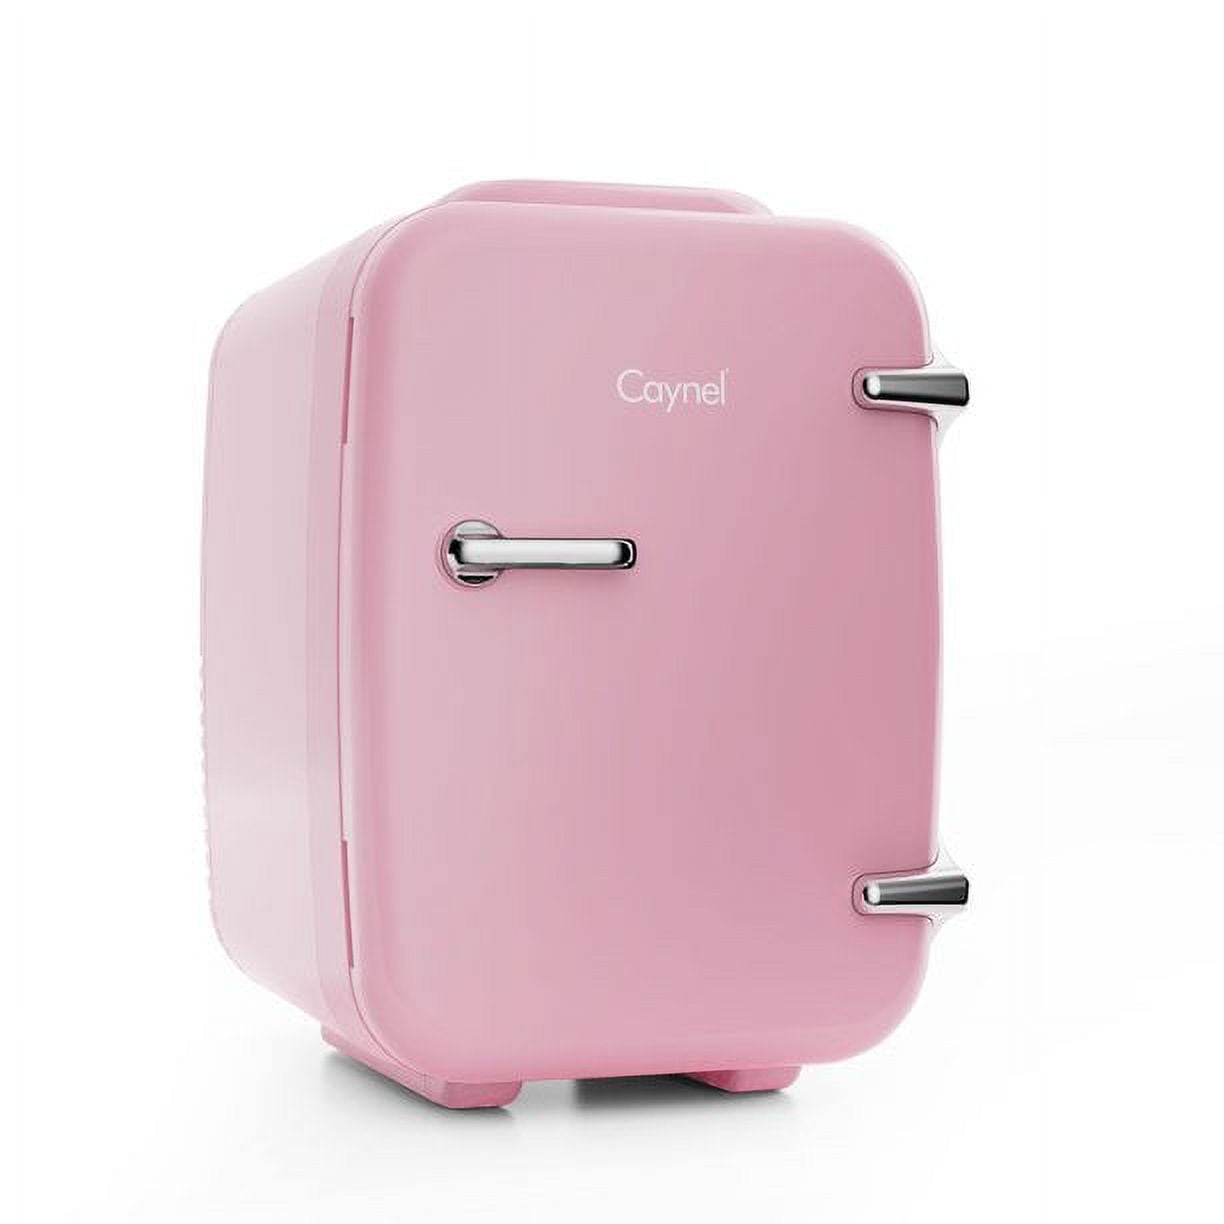 Caynel 4-Liter/6 Can Portable Mini Fridge with Warming Function, Pink 